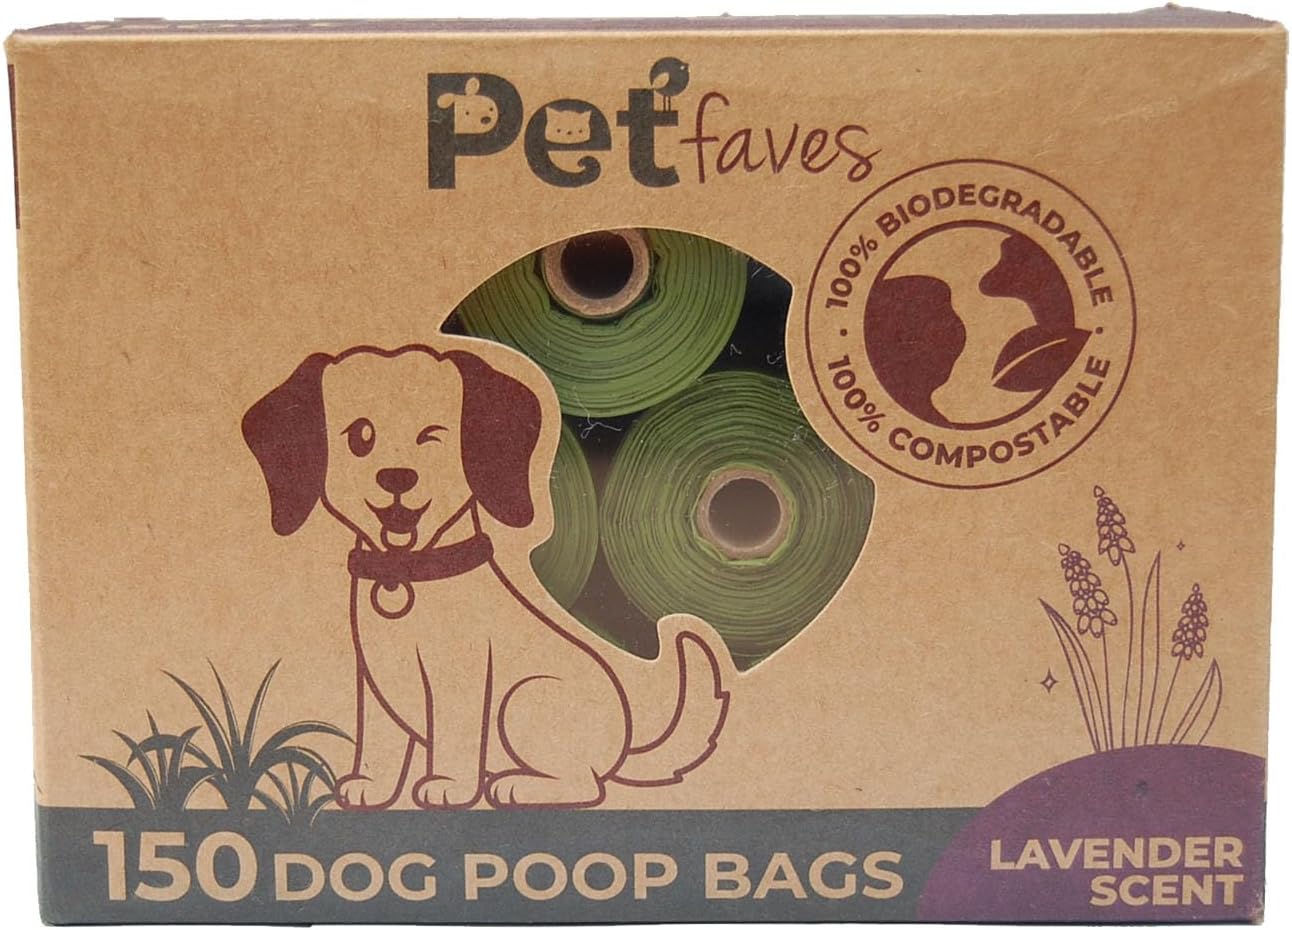 Pet Faves Biodegradable Dog Poop Bags -100% Leak-Proof, Strong and Extra Long Poop Bags for Dogs and Cats waste bag, Lavender Scented- 150 Count, with bag dispenser